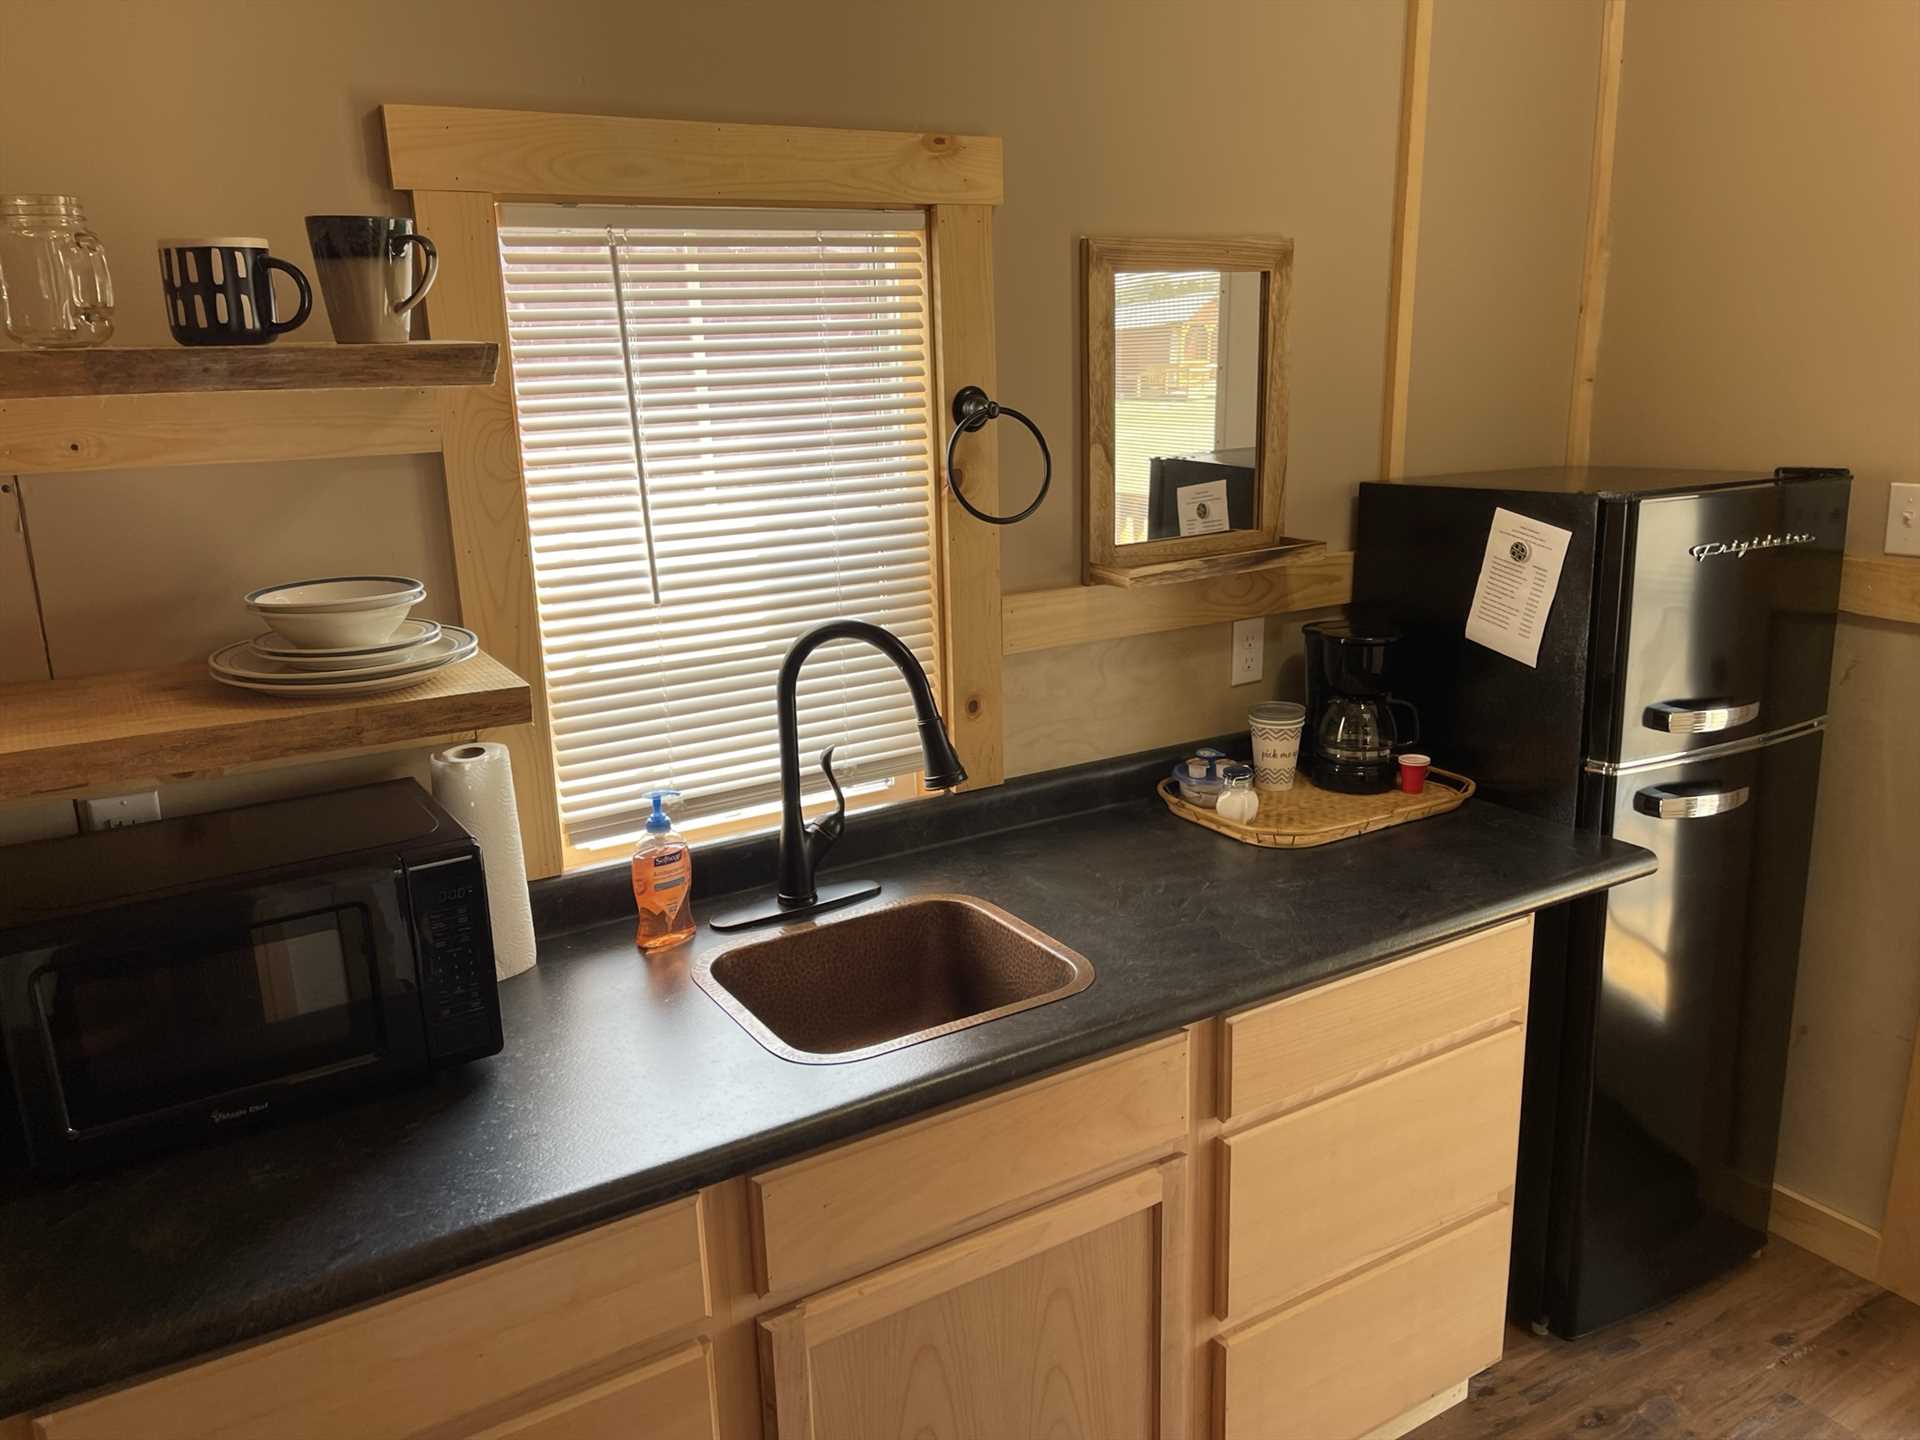                                                 A fridge, coffee maker, and microwave adorn the kitchen at the Hummingbird Cabin, as well as glasses and serving ware.